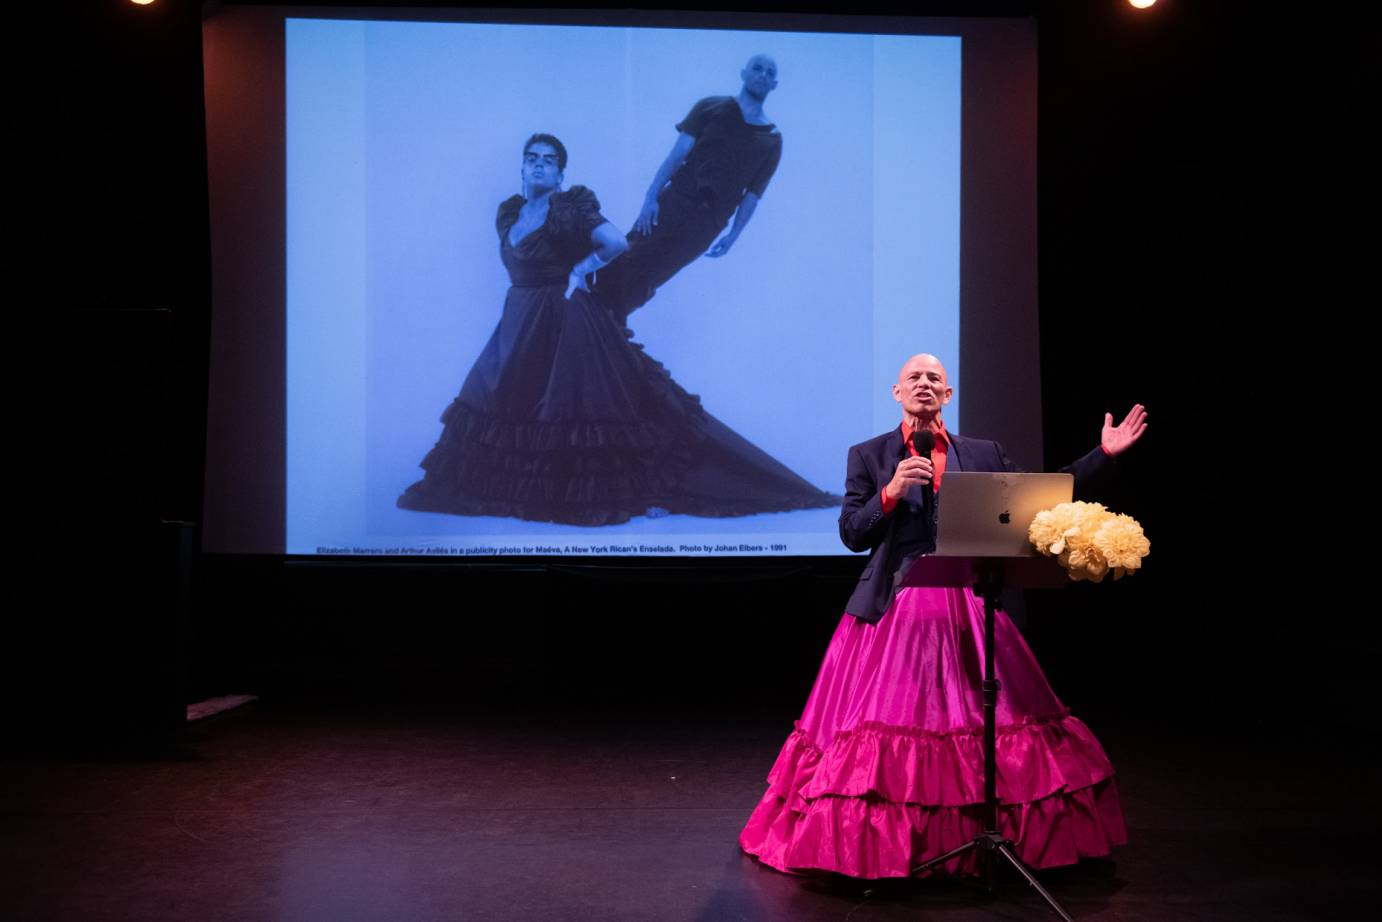 Bald headed man wearing a long, magenta flounced skirt,, magenta button down shirt and black blazer holding a microphone with a projected image of a woman in a trailing skirt with a standing man projecting from her hip